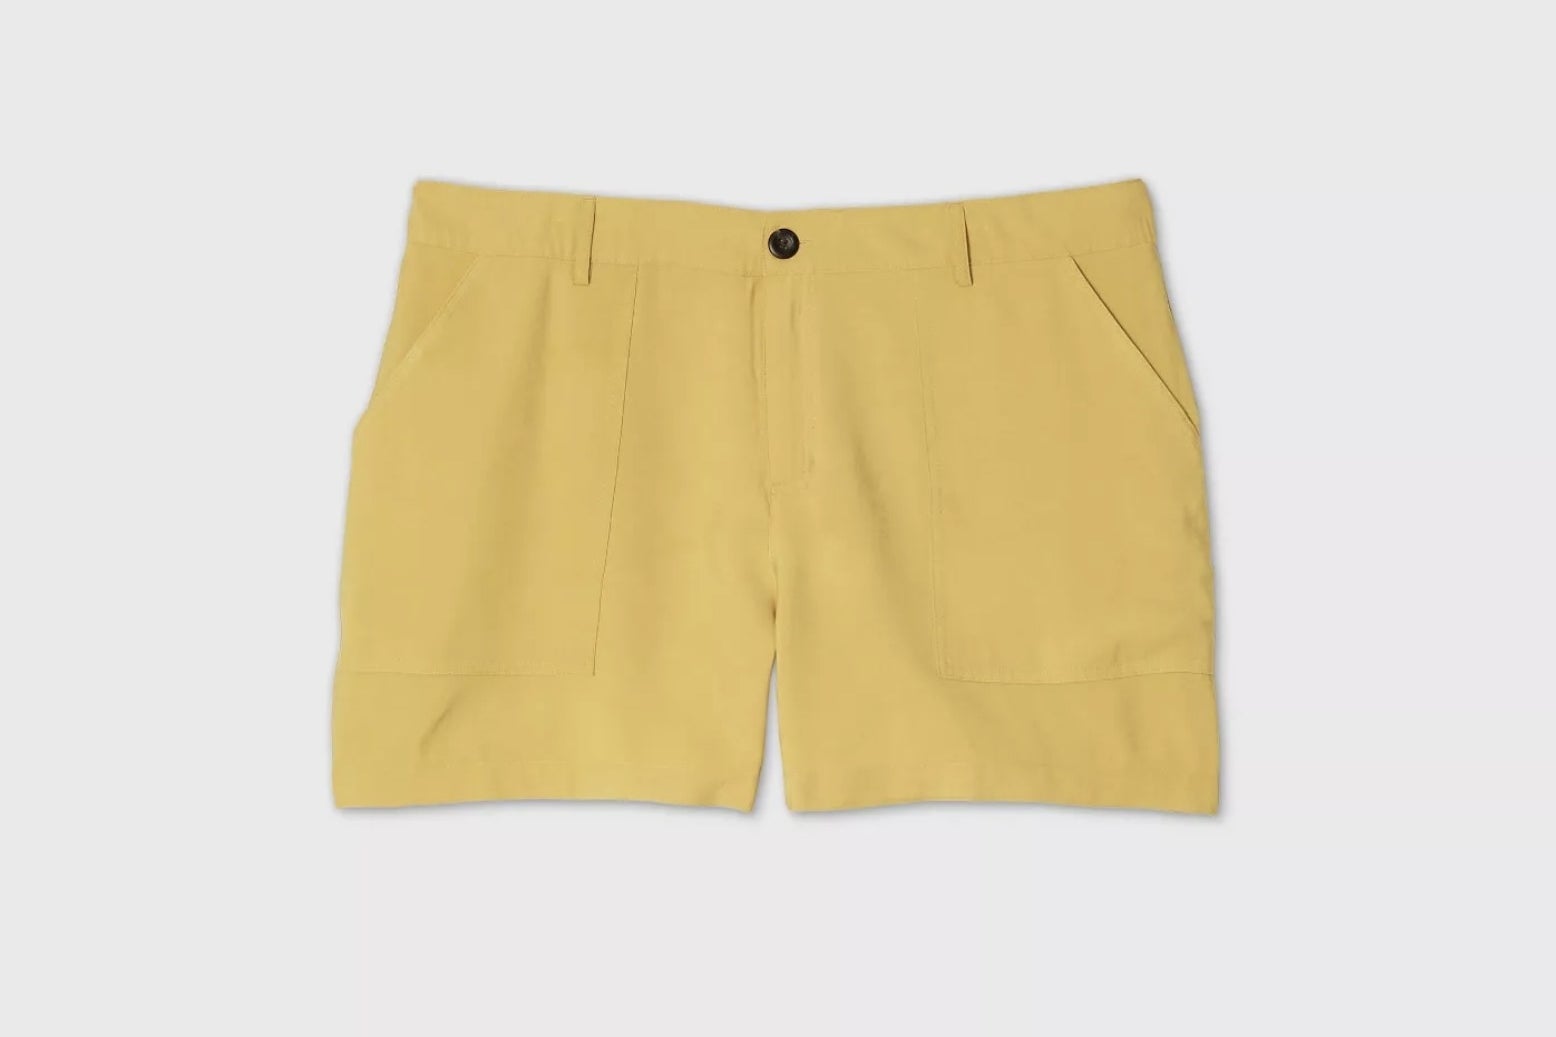 The yellow mid-rise shorts with a black button